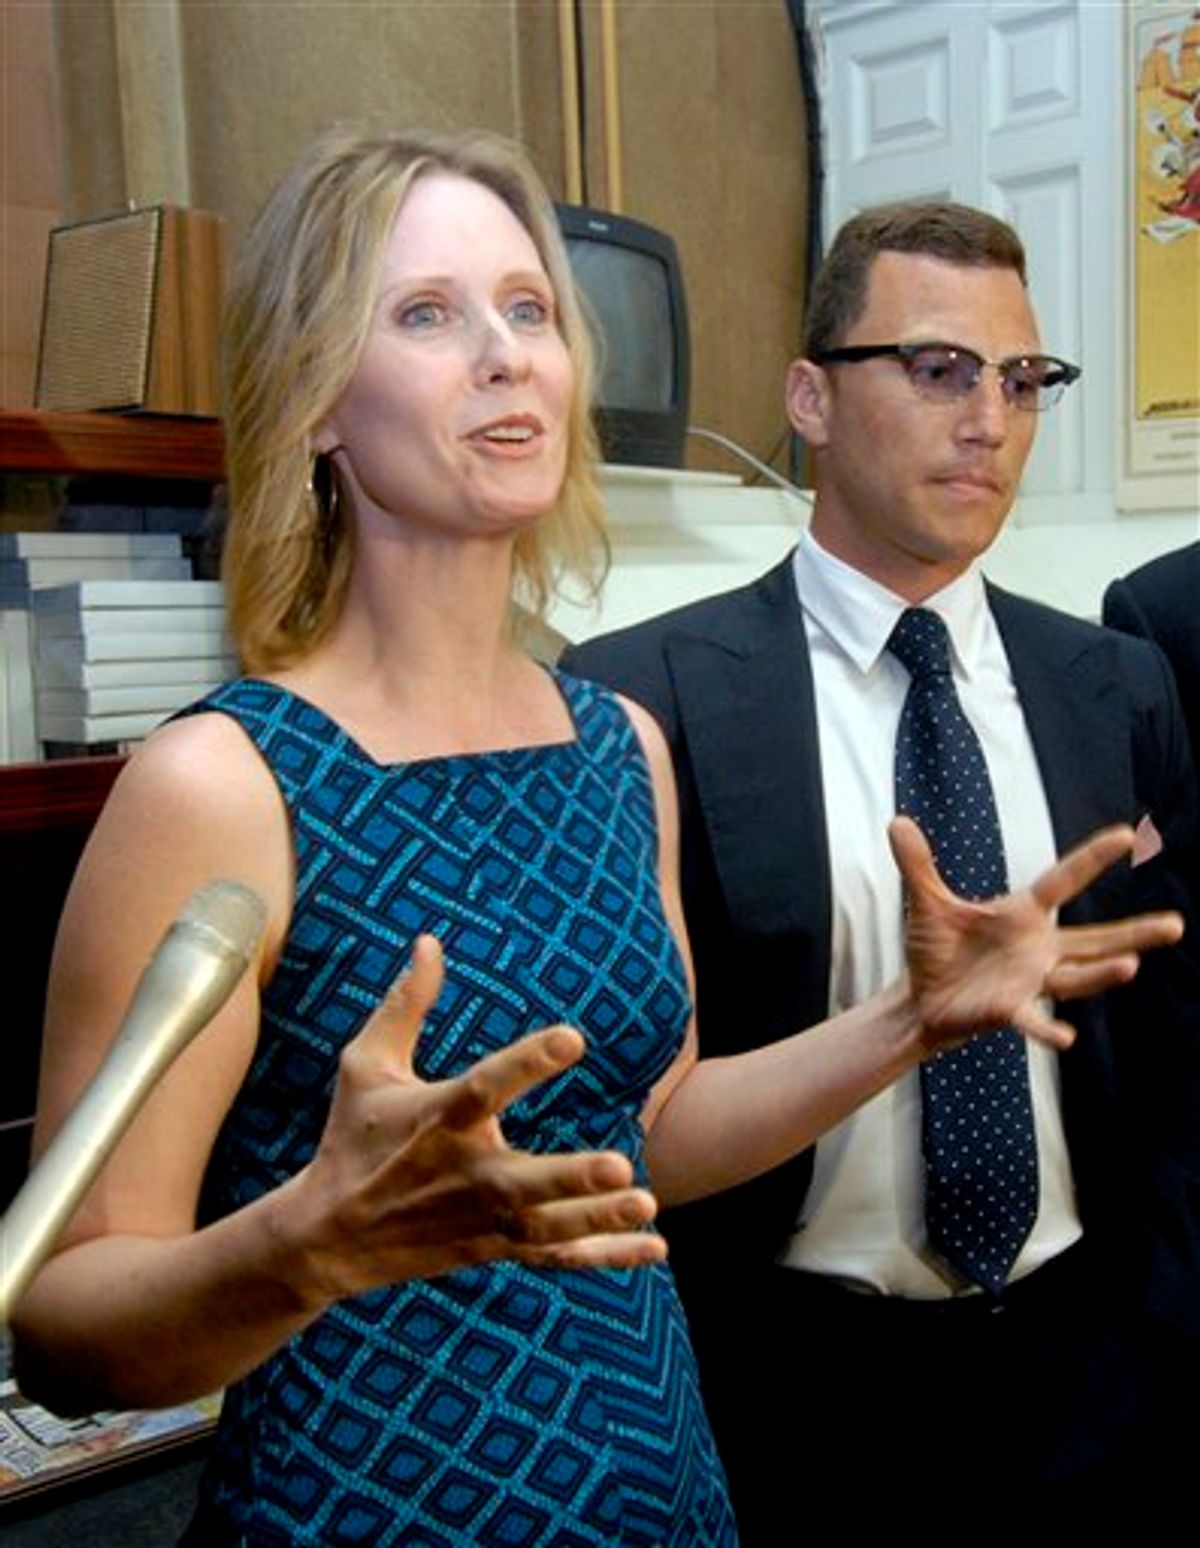 Actress Cynthia Nixon, left, and New York Rangers' Sean Avery talk with reporters after asking lawmakers to pass legislation to legalize same-sex marriage in New York at the Capitol in Albany, N.Y., Tuesday, June 14, 2011.  The New York state Senate's Republican majority is facing an all-out effort by Democrats to legalize gay marriage in the last days of the session and reinvigorate the national movement.   (AP Photo/Hans Pennink) (AP)